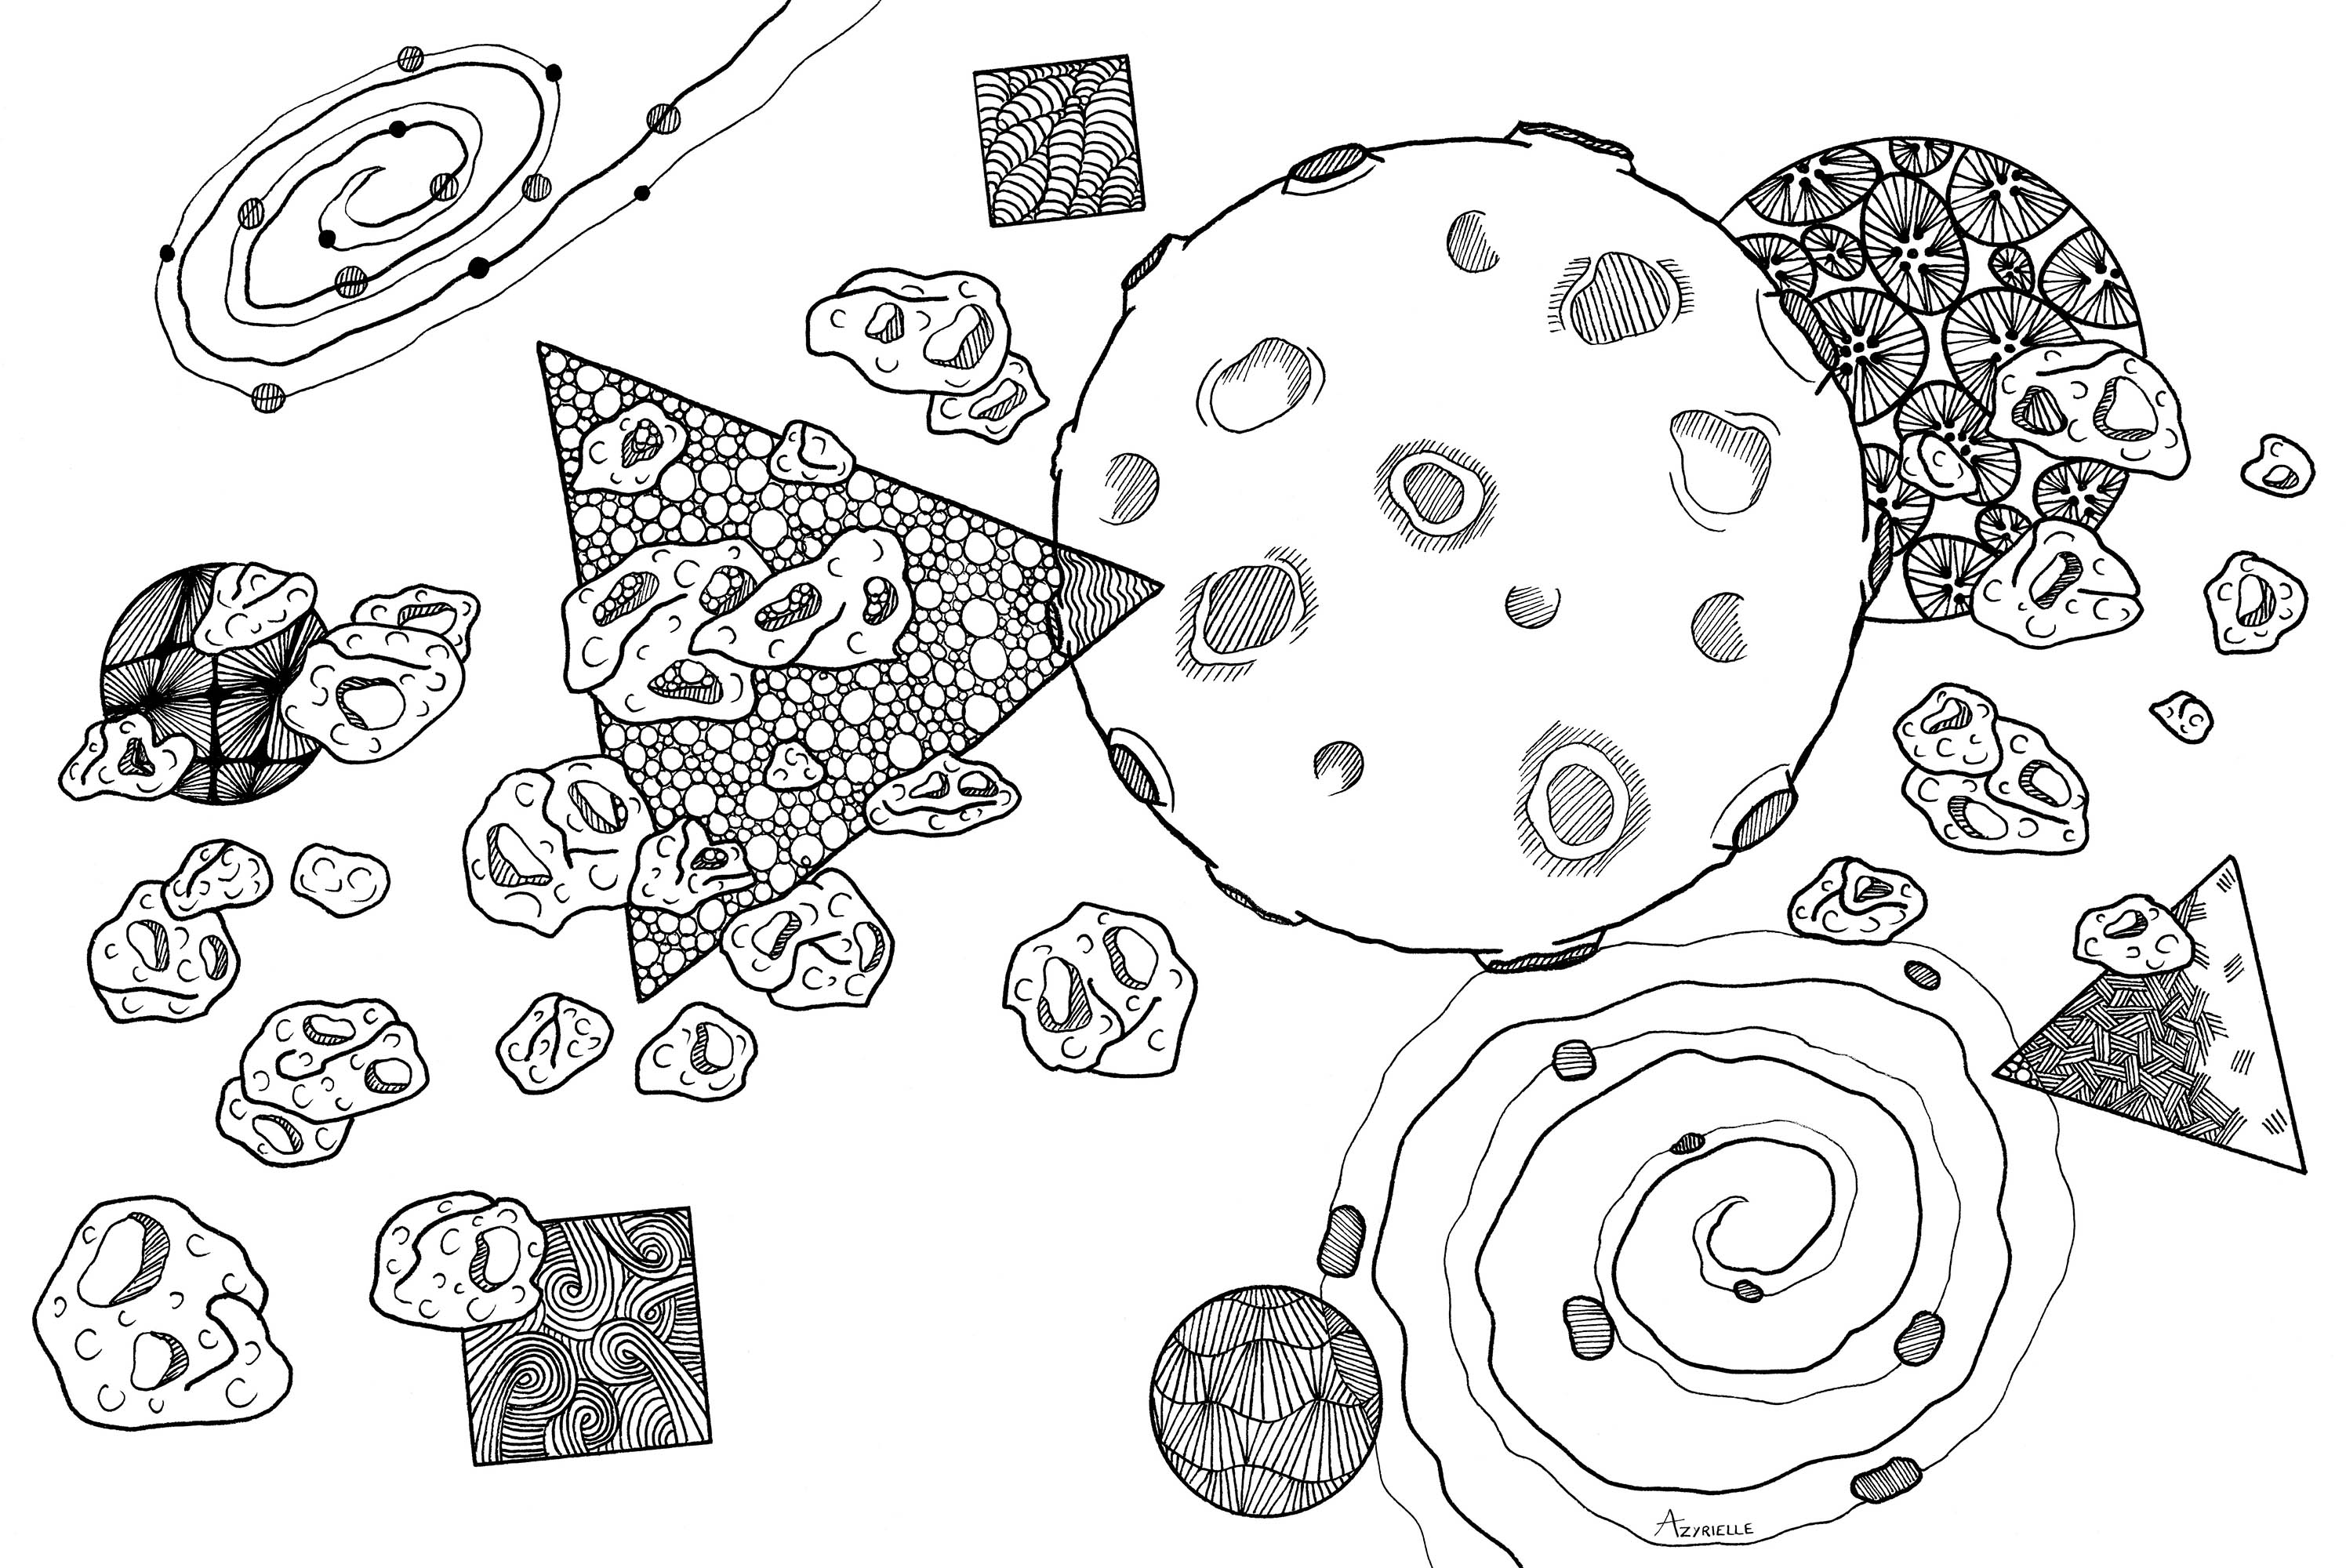 Discover this crazy galaxy in Zentangle style!. Let yourself be carried away in this crazy galaxy and discover asteroids and planets drawn in a Zentangle style.
Let's go, get out your pencils and explore this strange universe ...